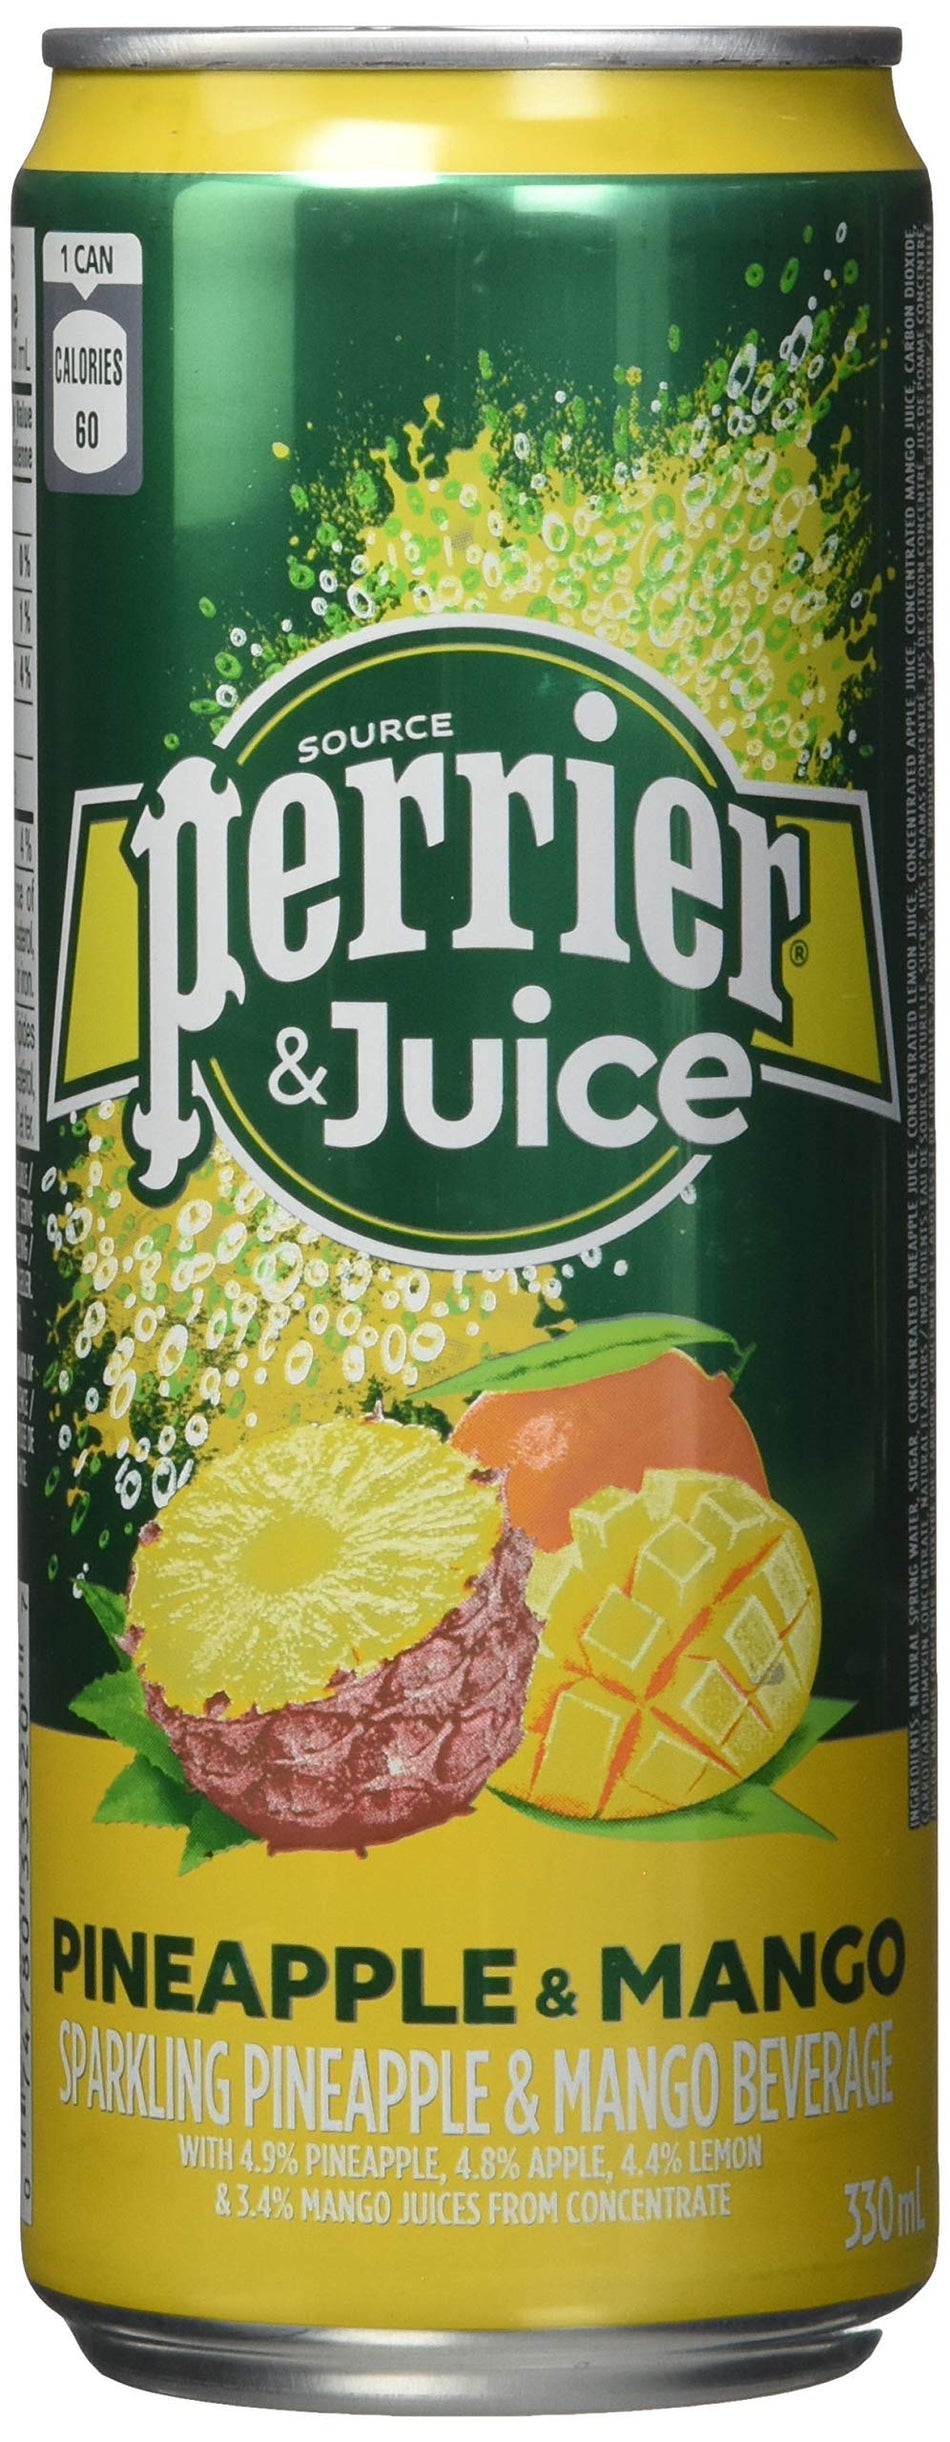 Juice Sparkling Pineapple & Mango Beverage, 330mL can, 24 Count(10-Pack)